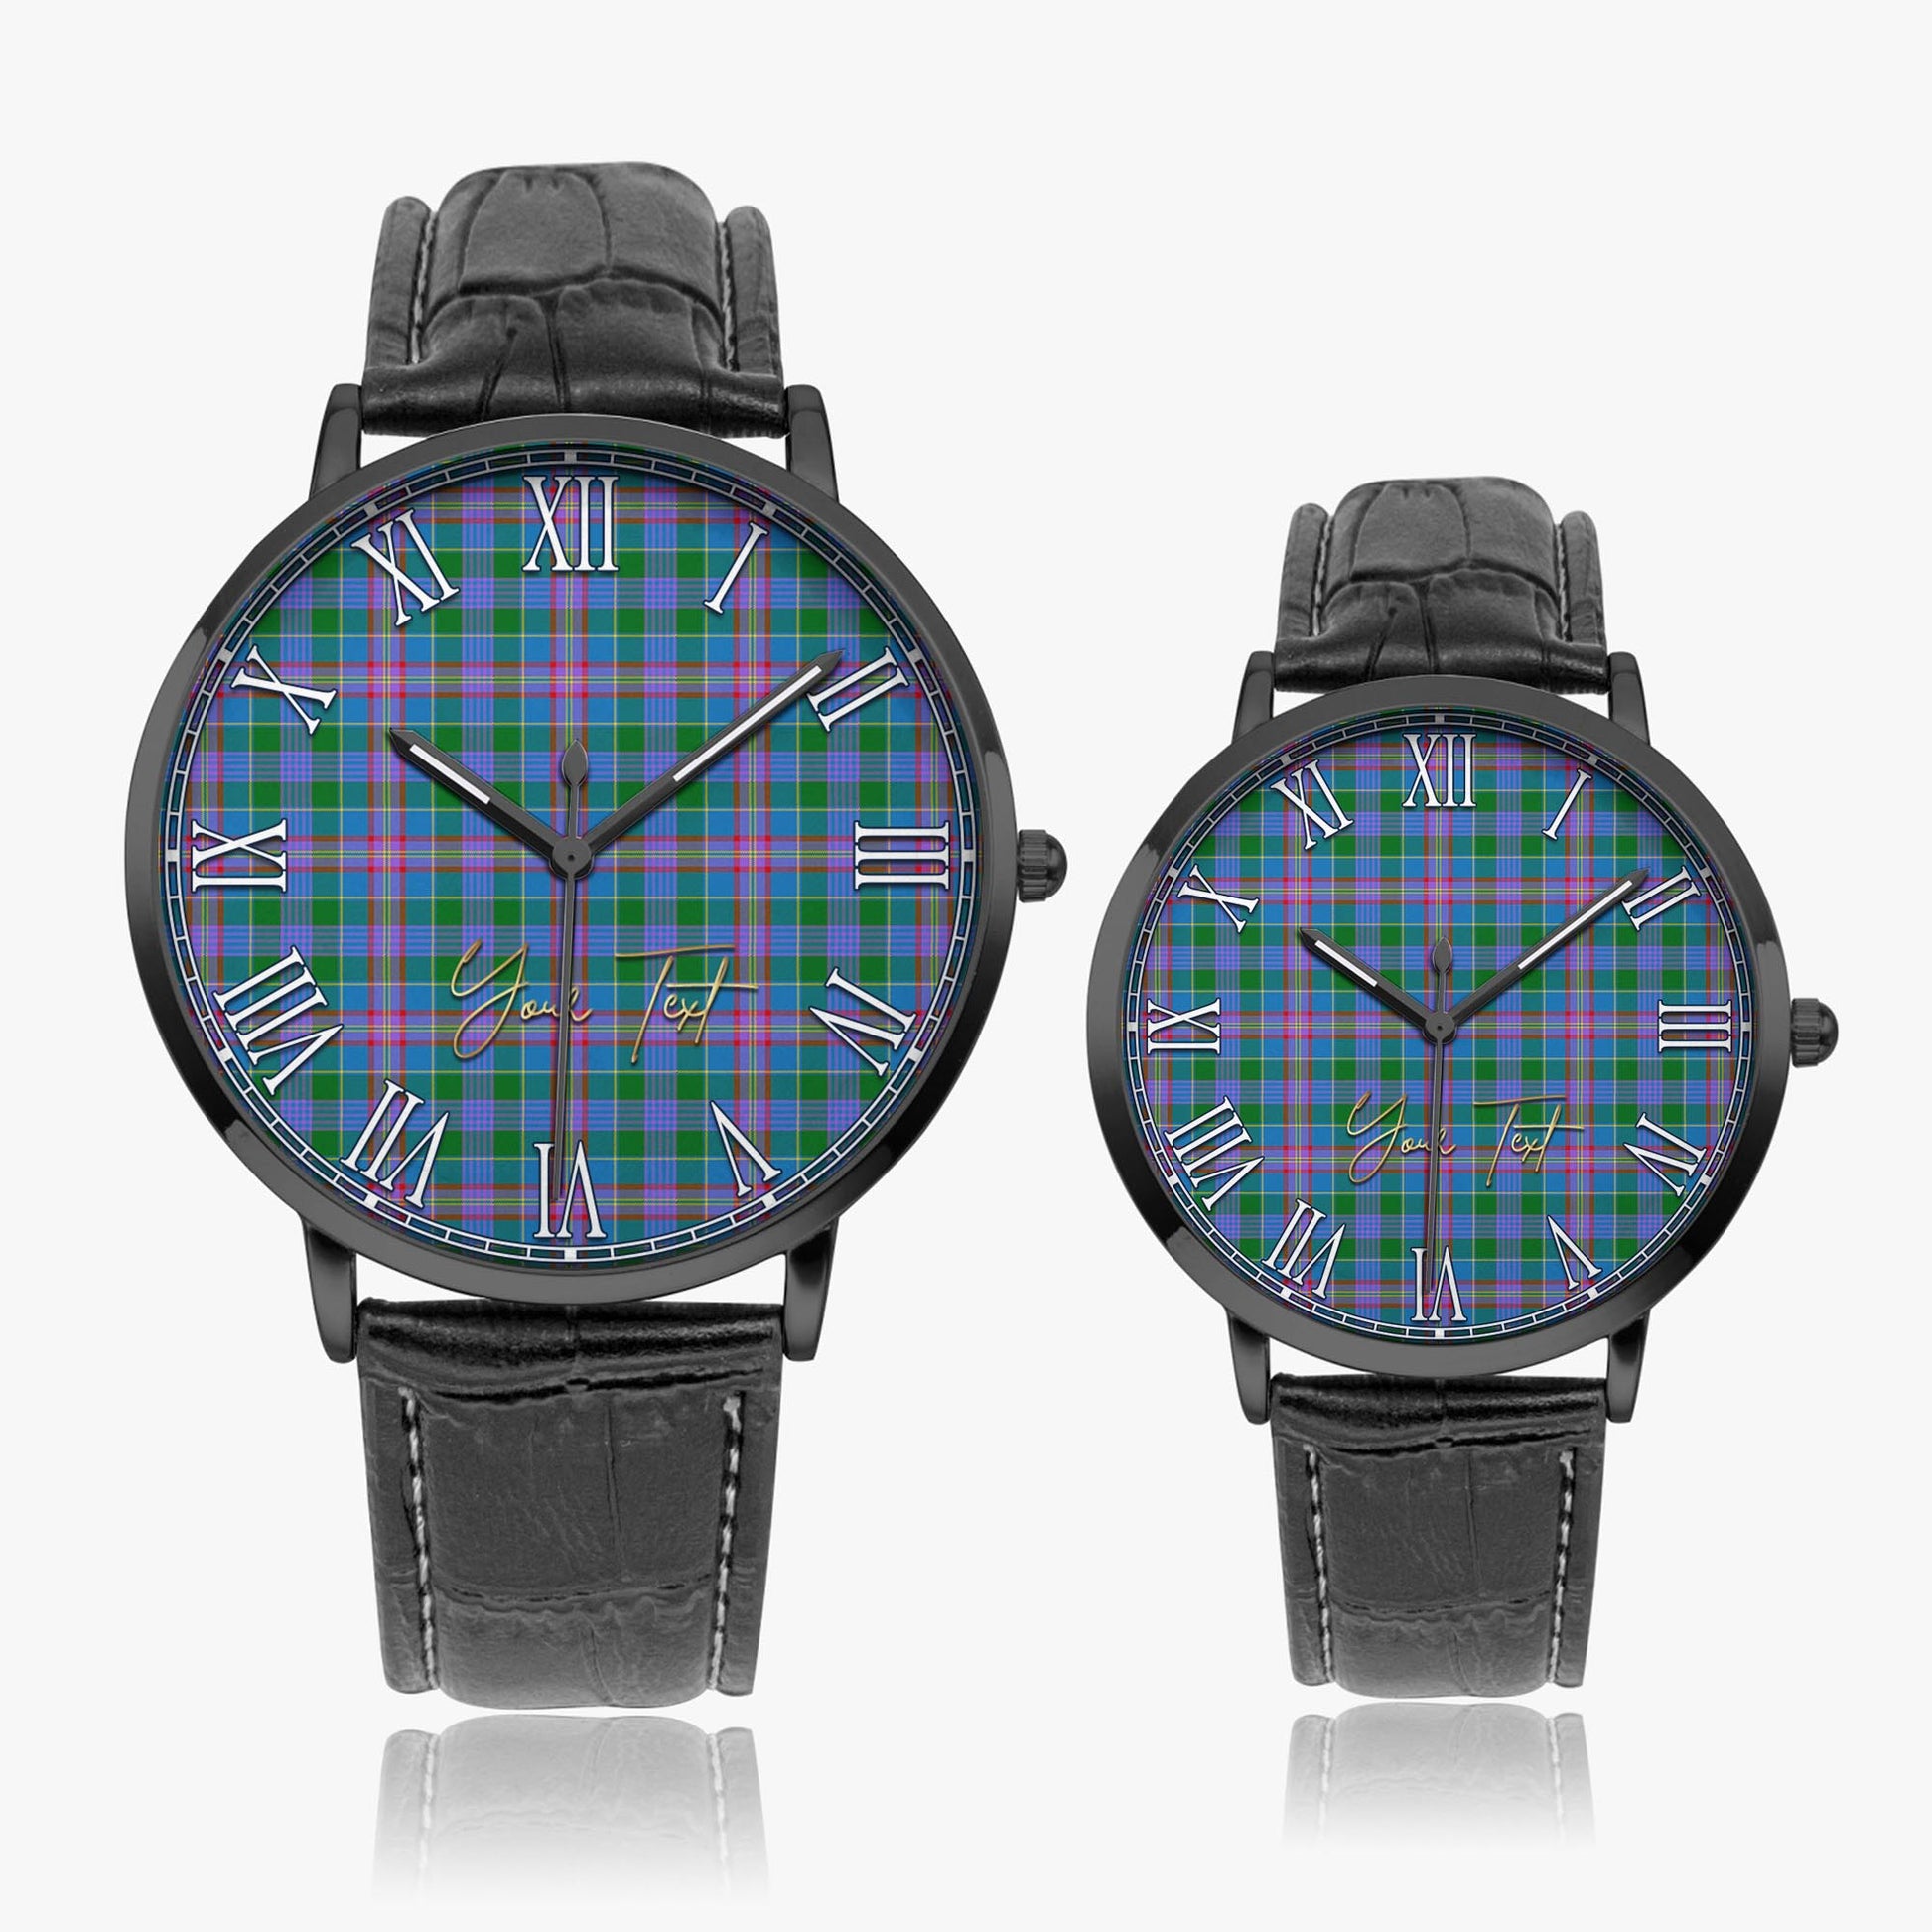 Ralston Tartan Personalized Your Text Leather Trap Quartz Watch Ultra Thin Black Case With Black Leather Strap - Tartanvibesclothing